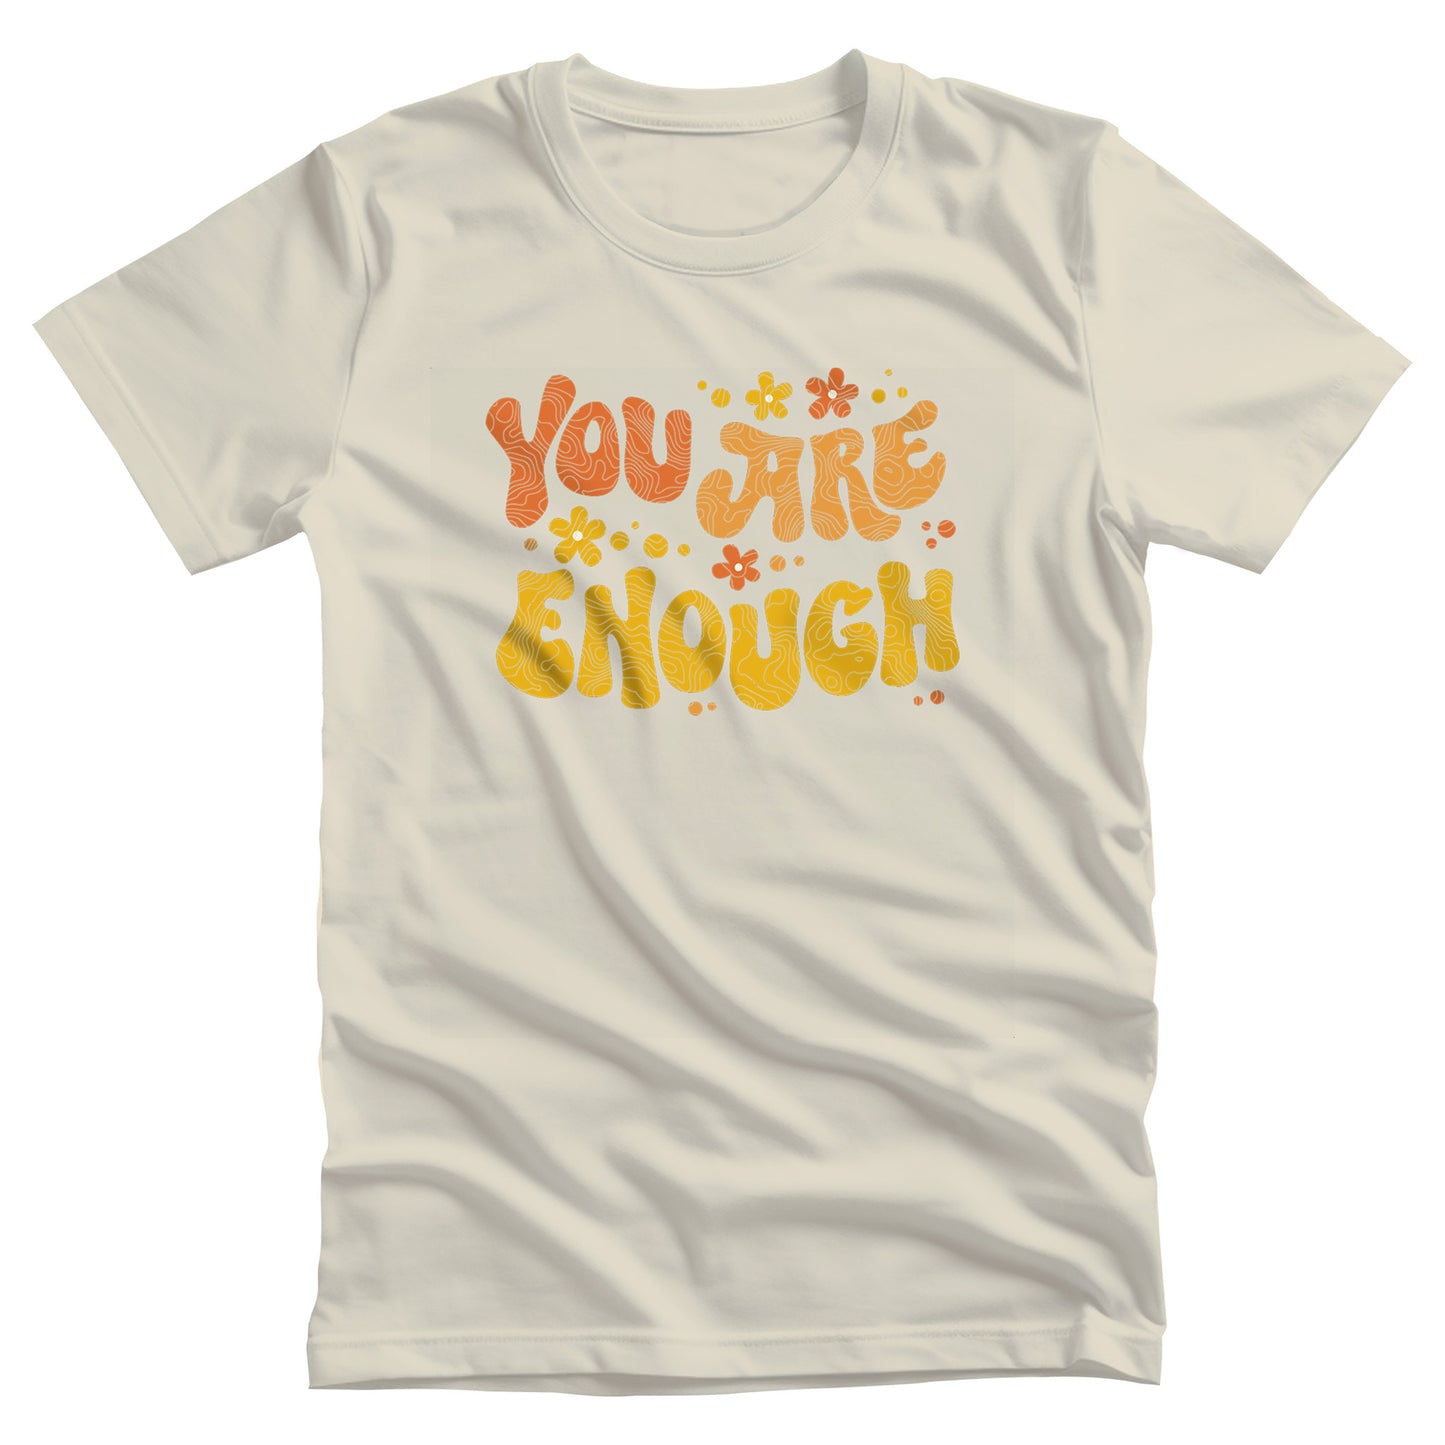 Natural color unisex t-shirt with a graphic that says “You Are Enough” in a retro font. There are small retro flowers spaced throughout. “You” is reddish-orange, “Are” is orange, and “Enough” is yellow, all retro as well.